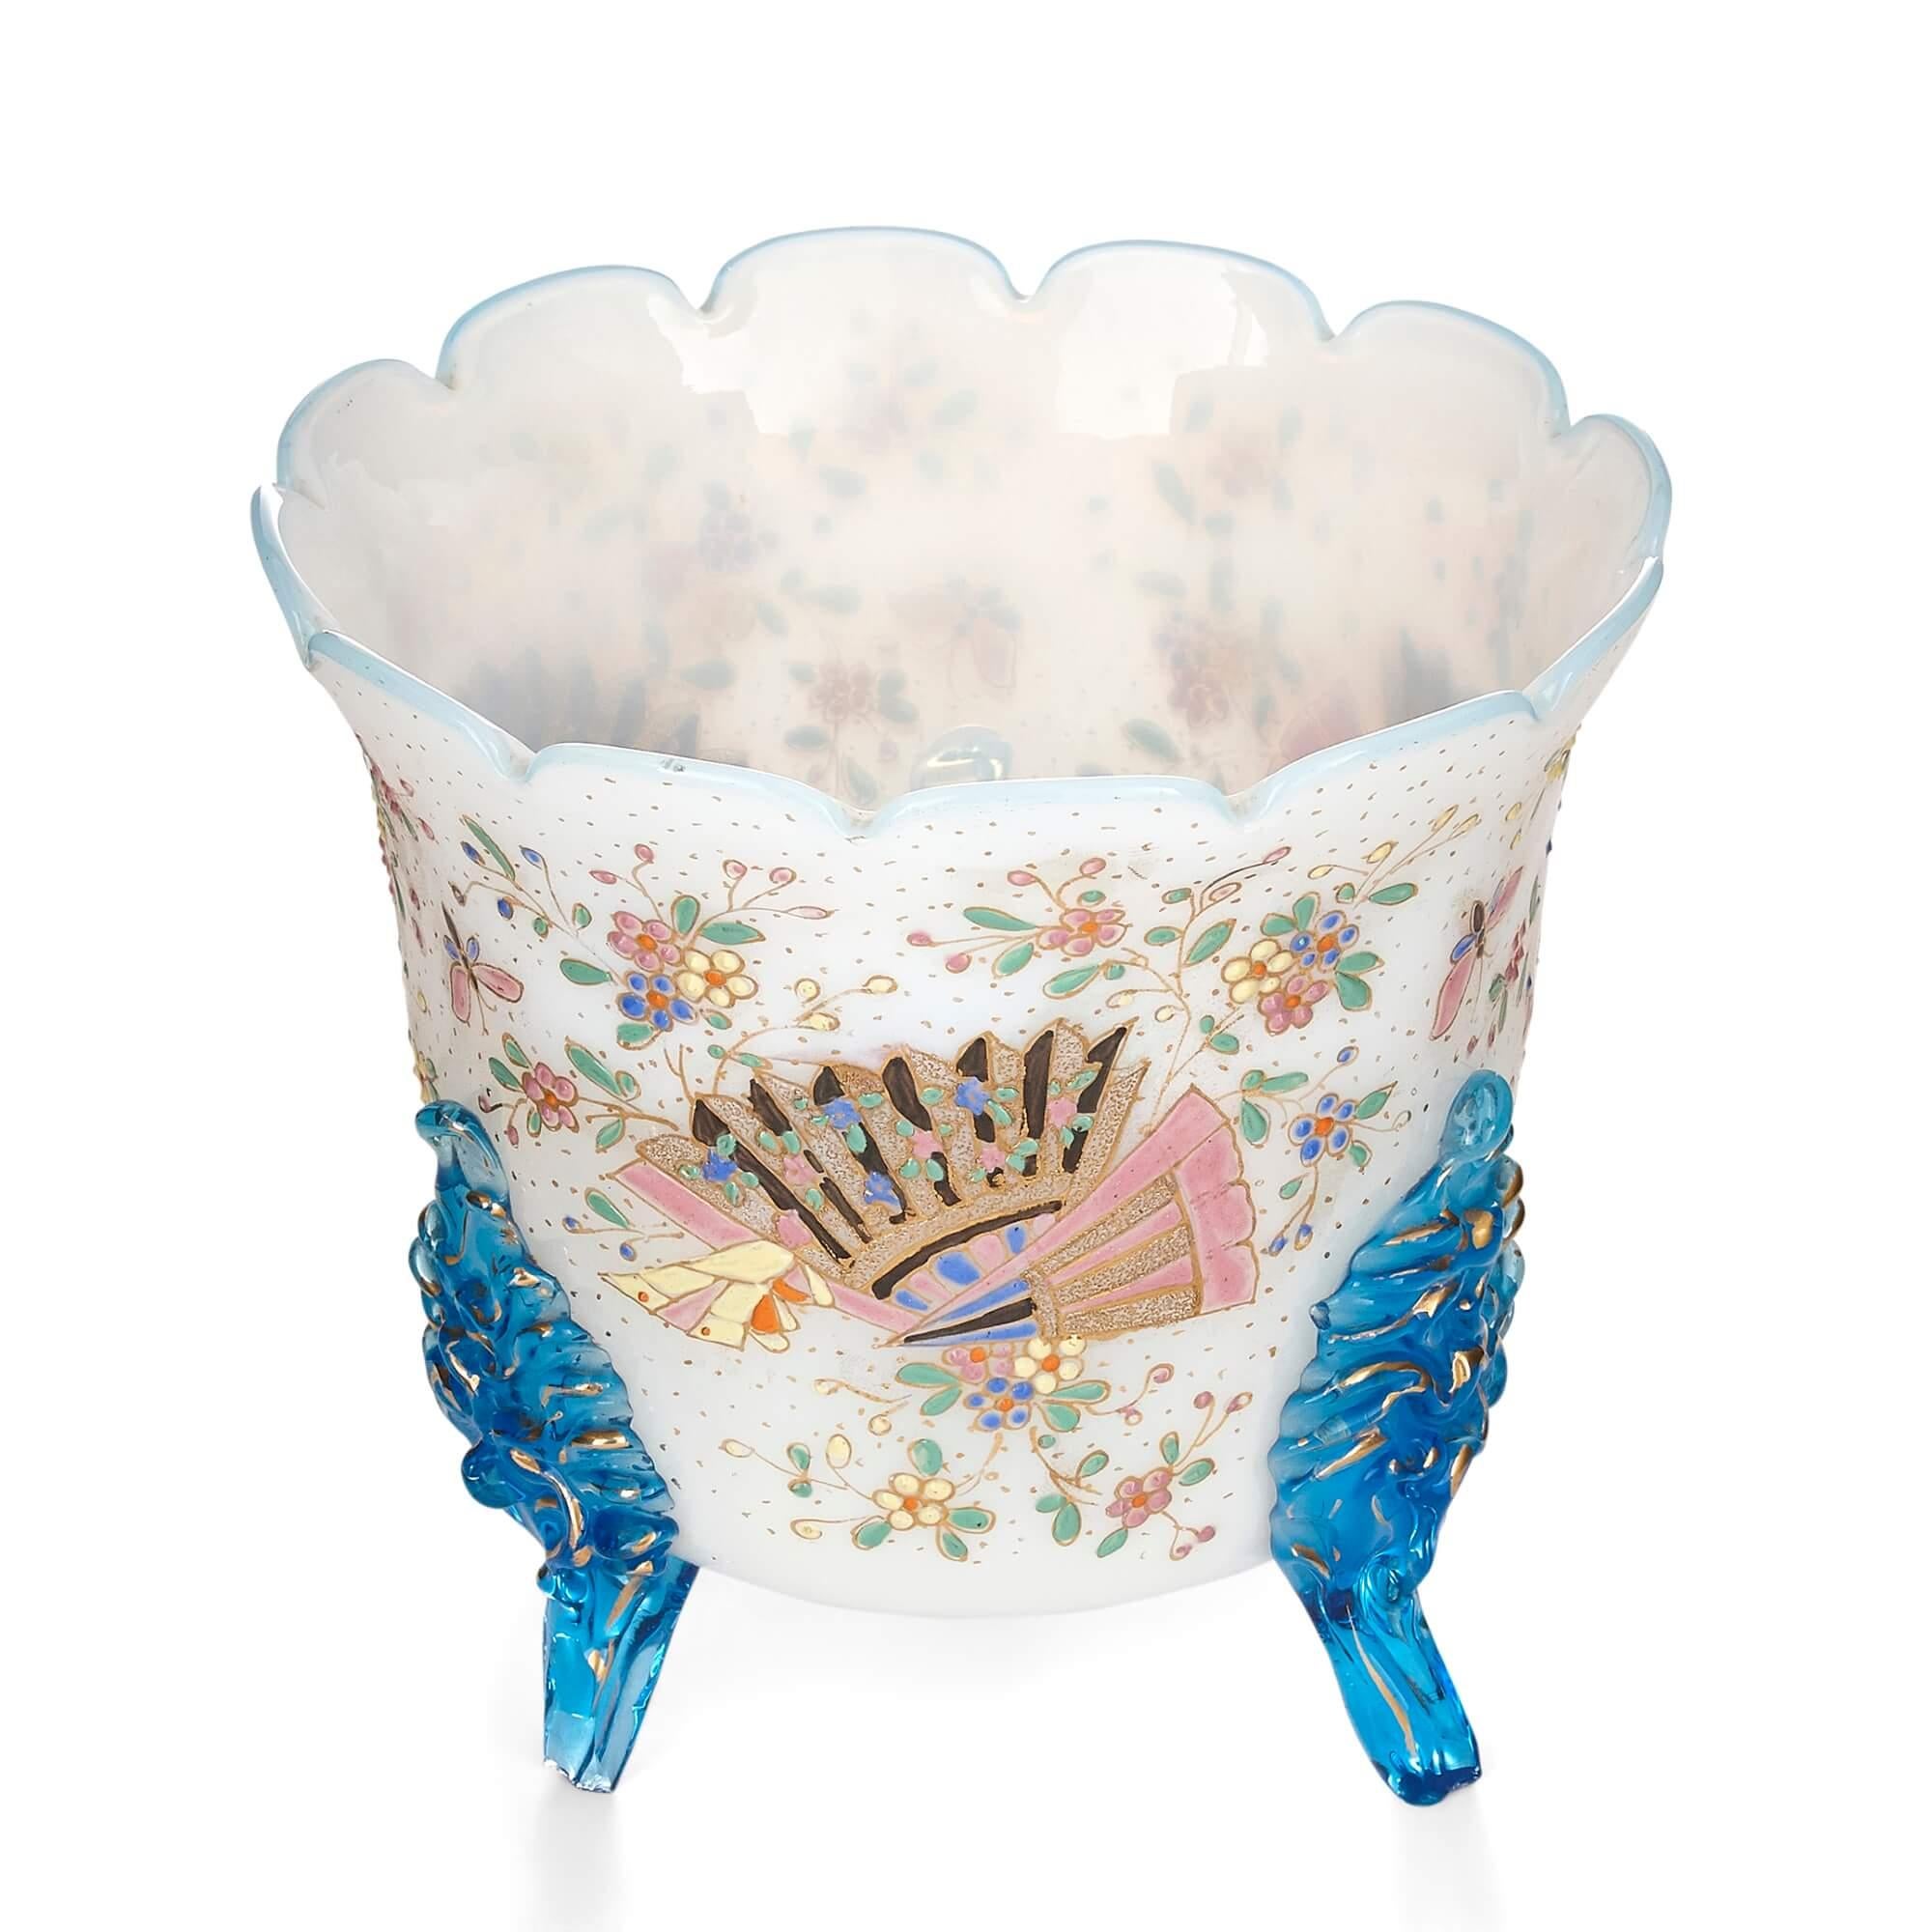 French opaline glass planter painted with floral designs
French, early 20th century
Measures: Height 14.5cm, diameter 15.5cm

This charming opaline glass planter features three bright blue glass legs and a body profusely painted with vibrantly